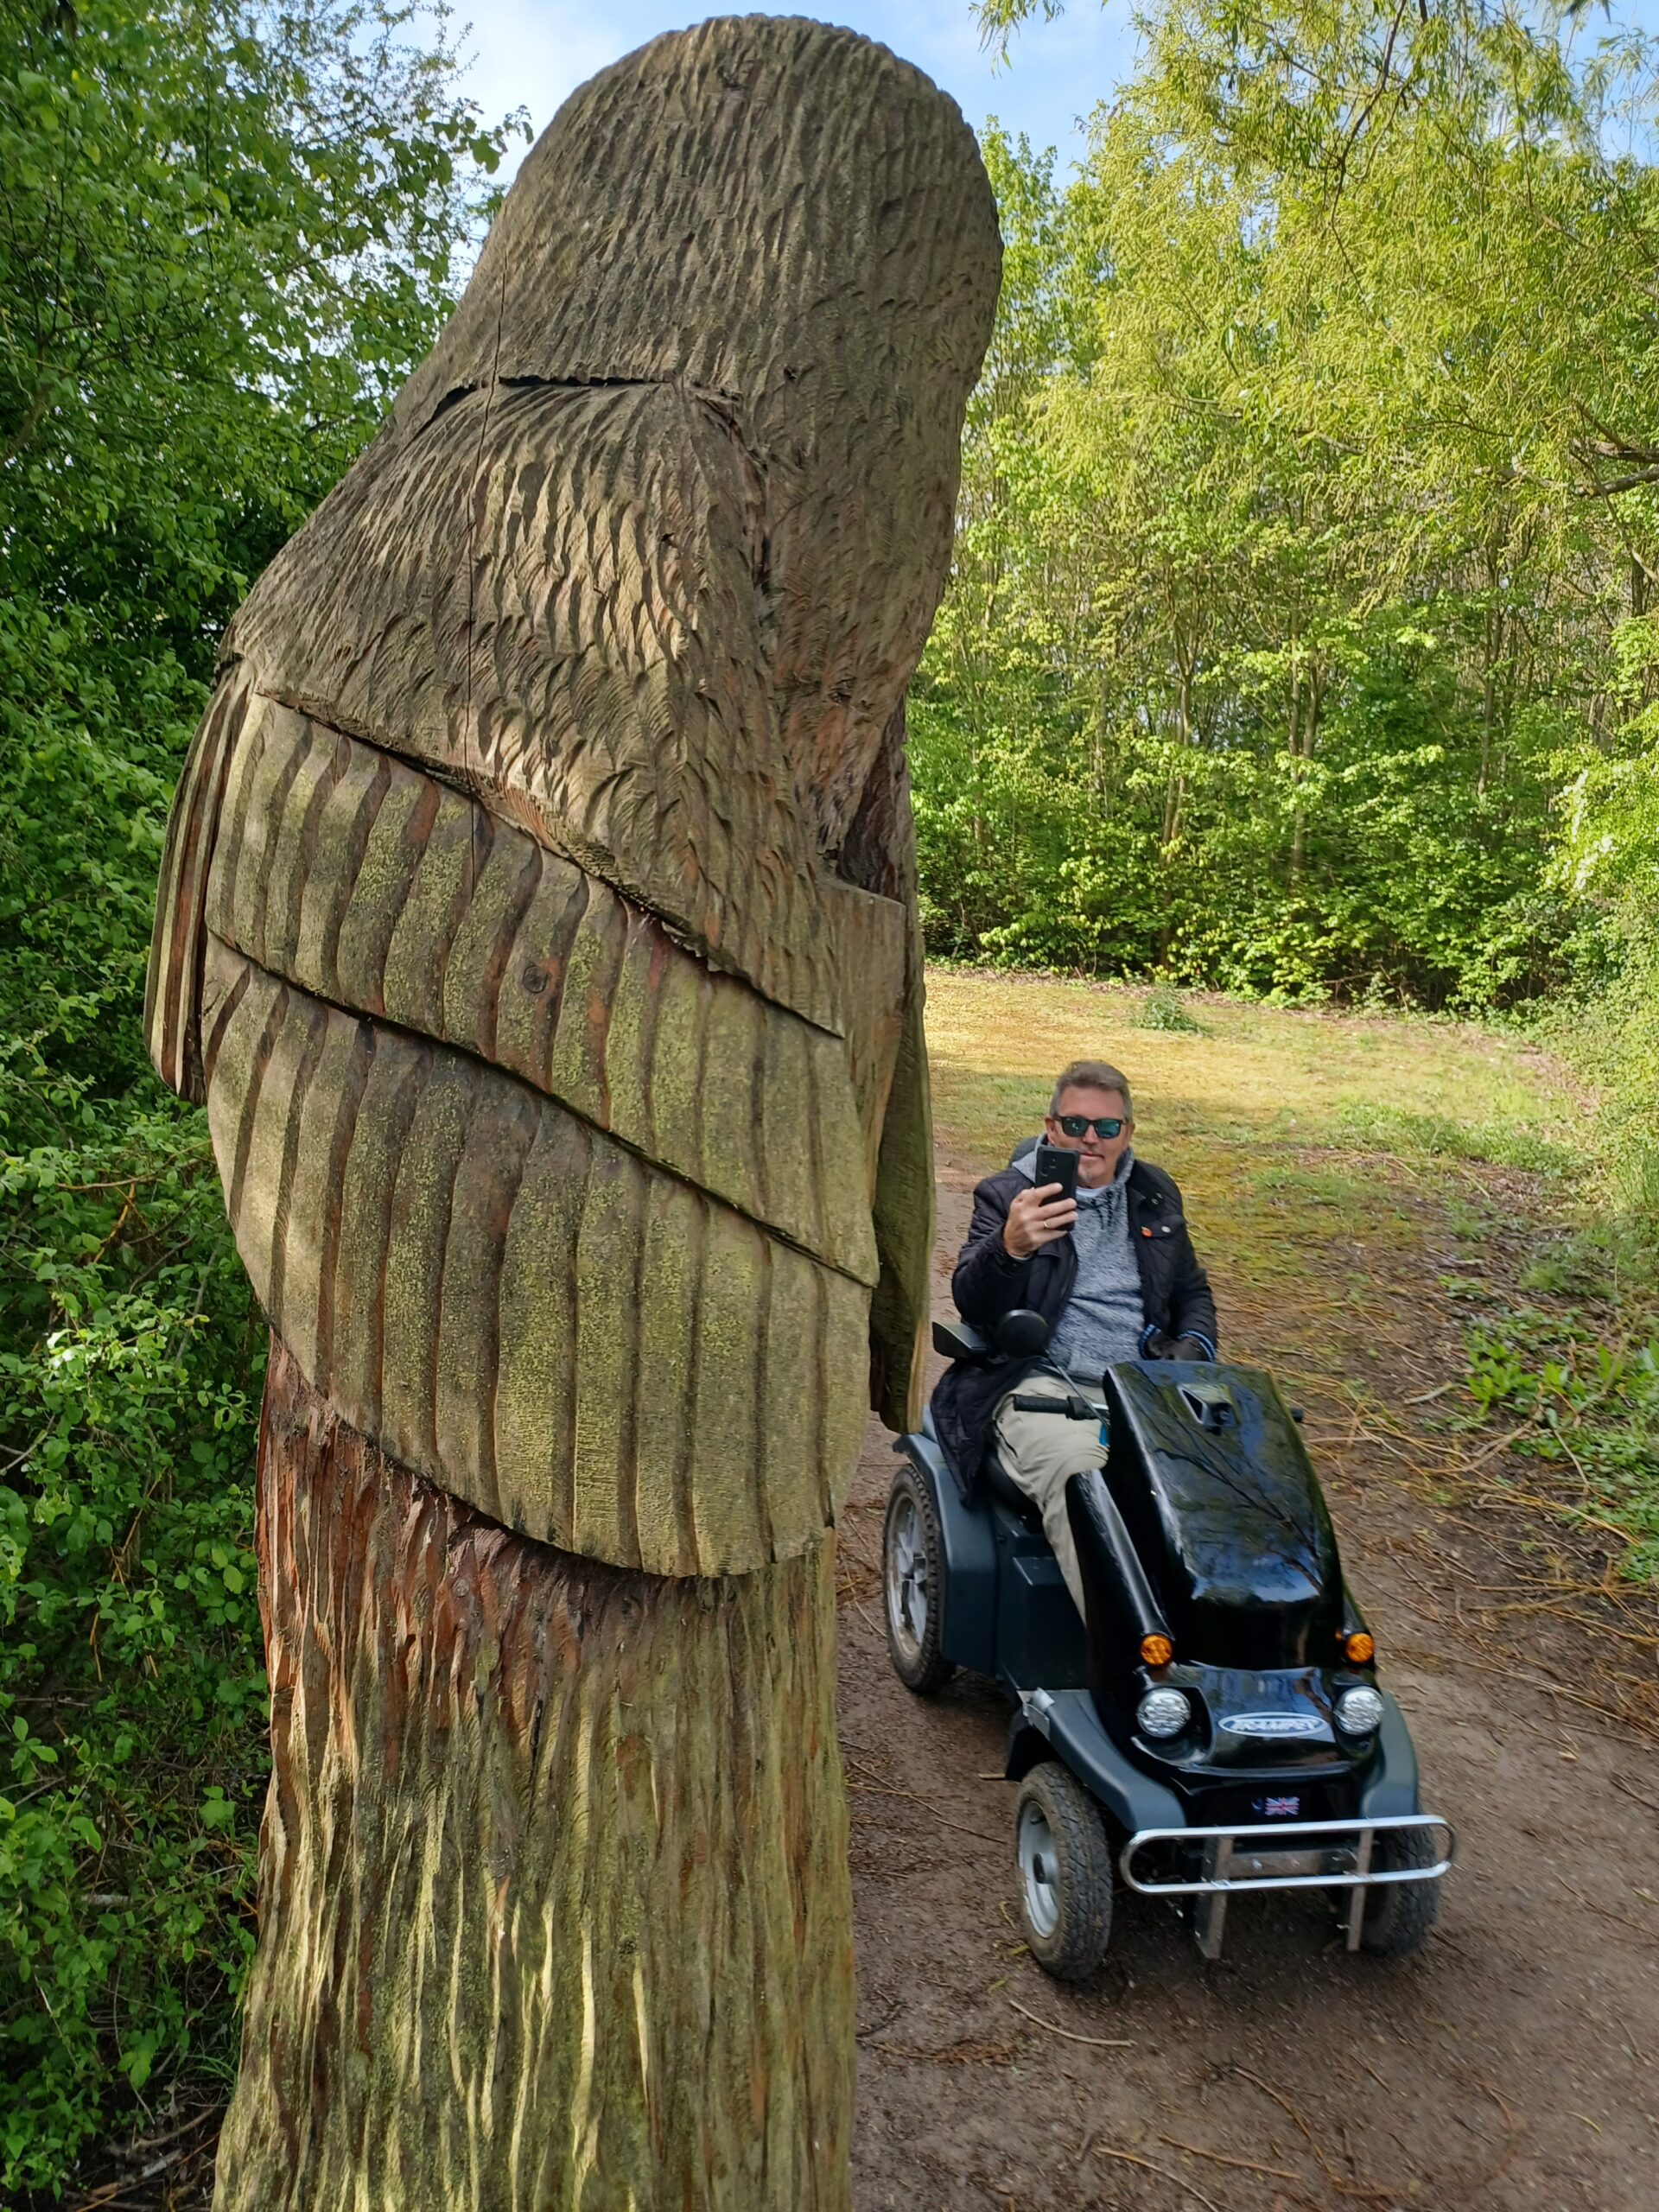 Man sat on a Tramper all terrain mobility scooter takes a photo of a wooden sculpture